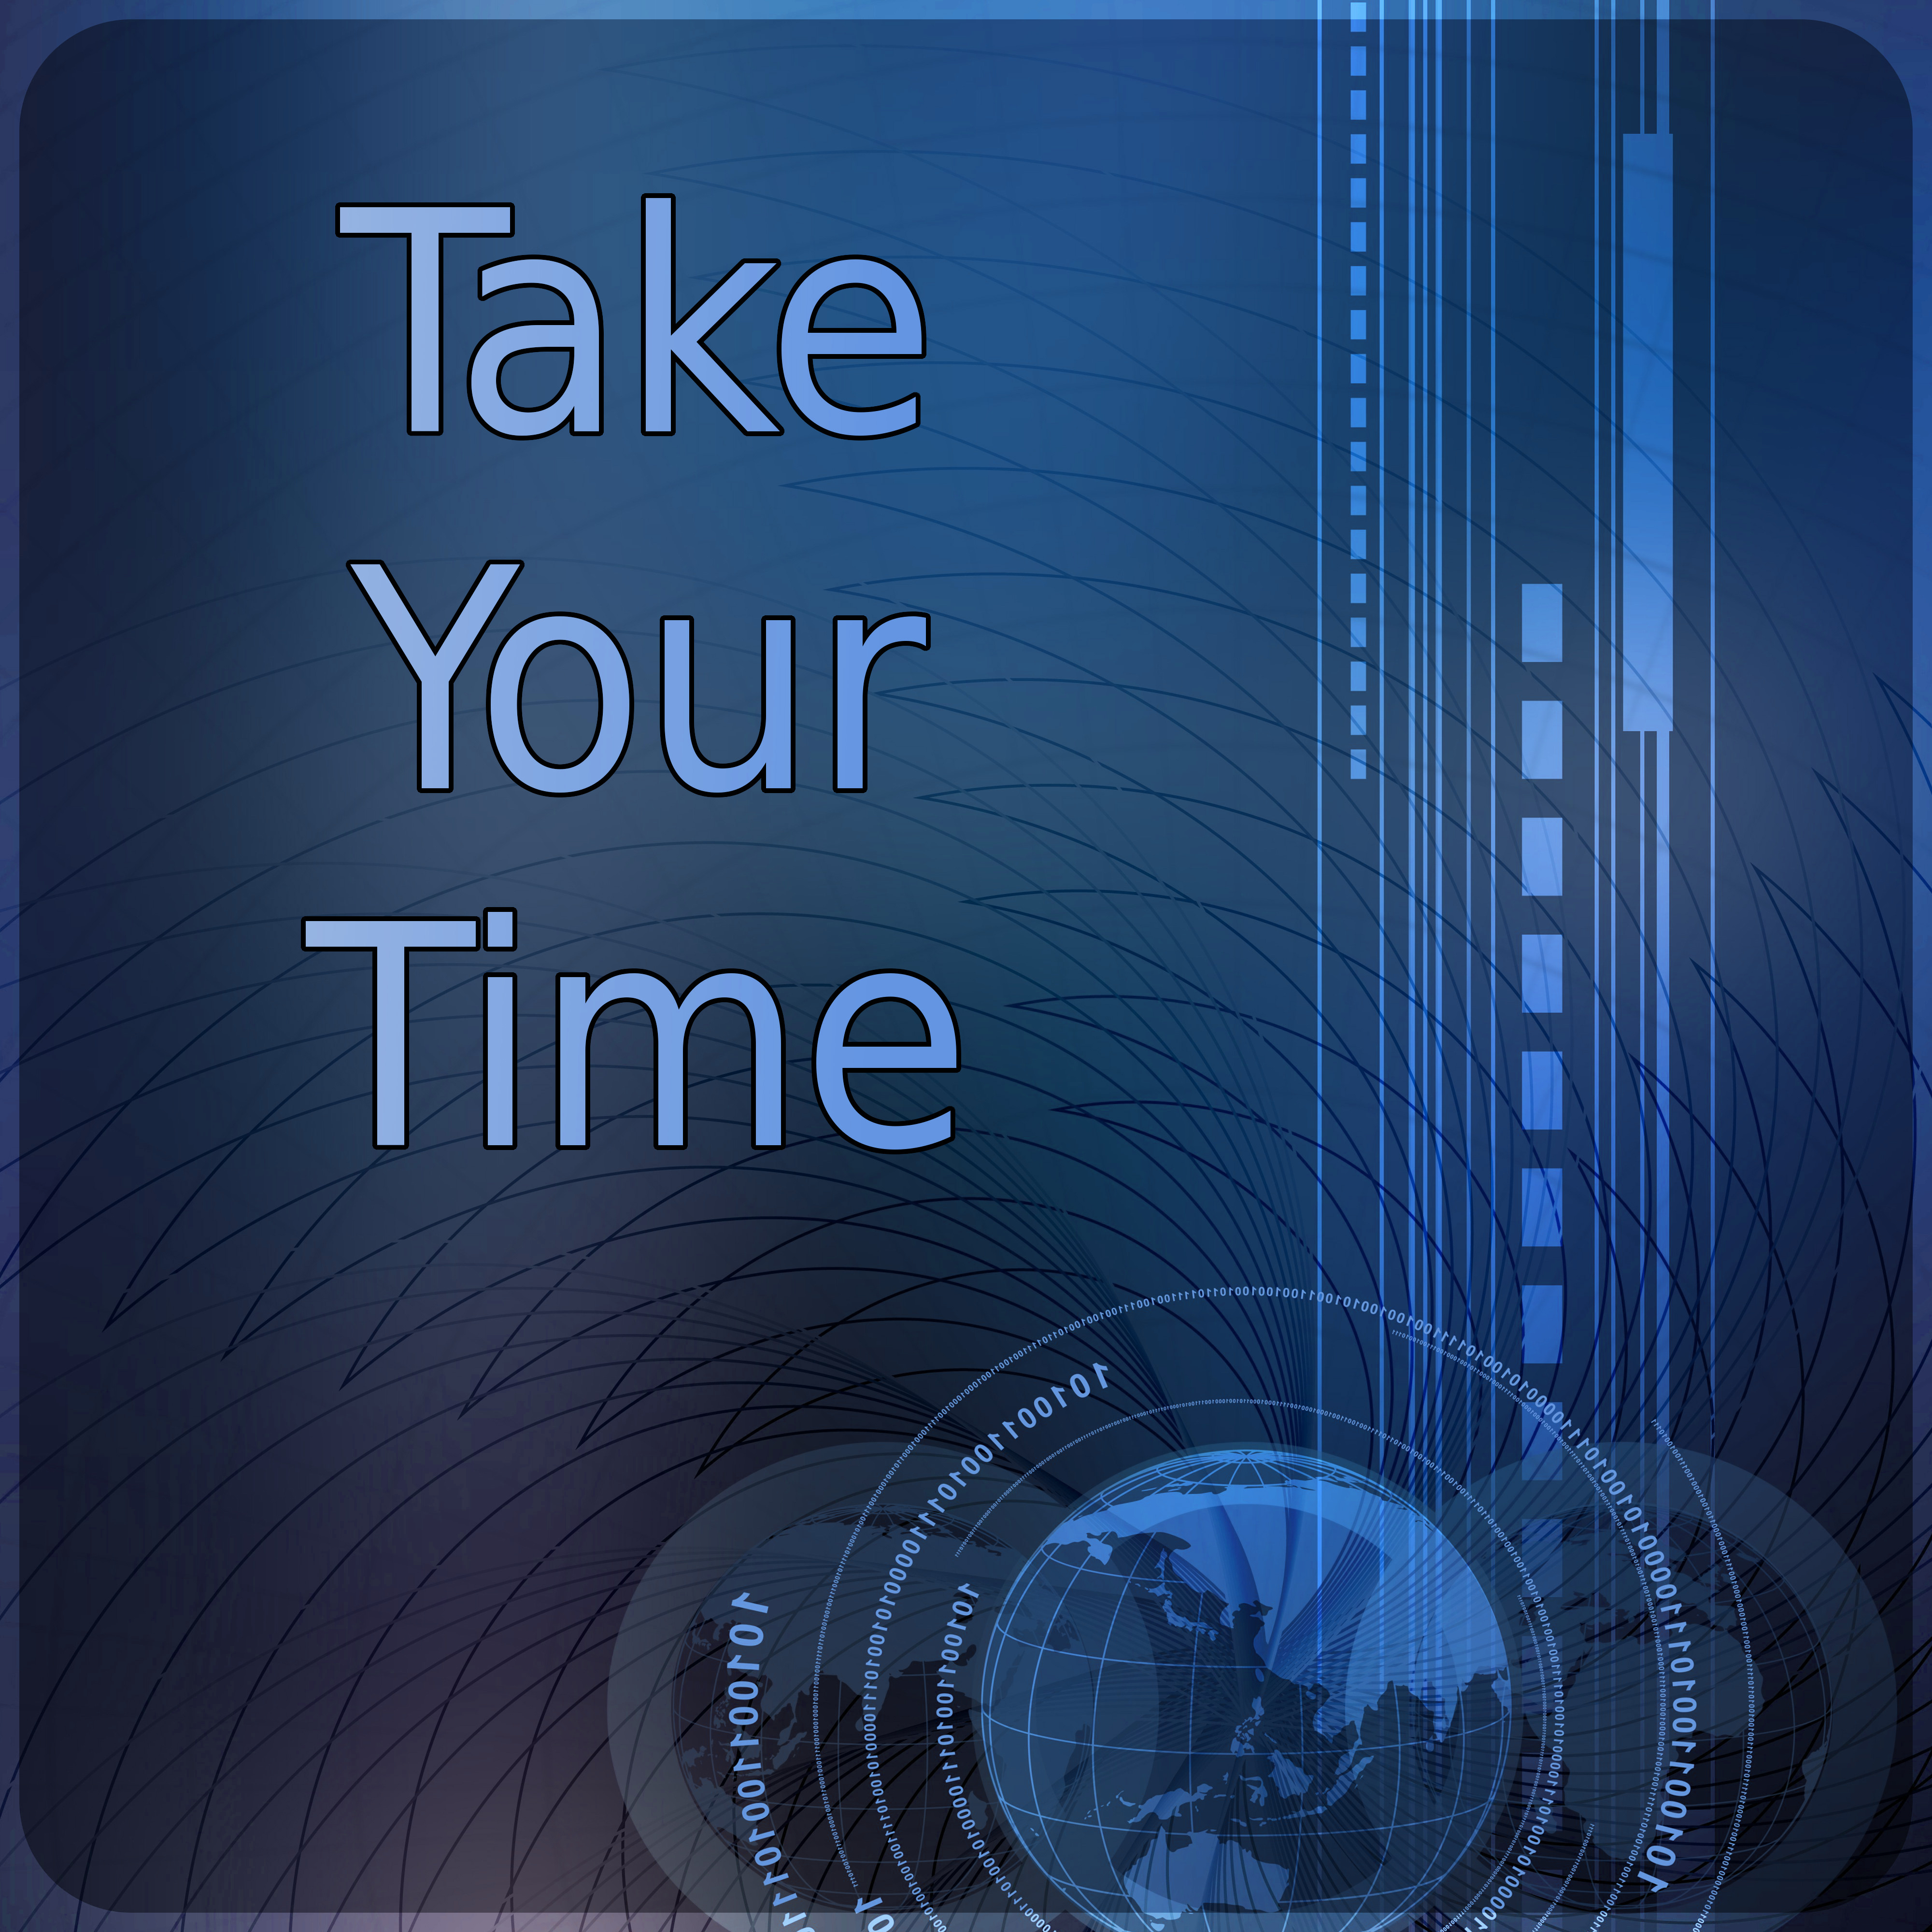 Take Your Time – Relax Yourself, Soothing Sounds for Work to Reduce Stress, Mental Stimulation at Workplace